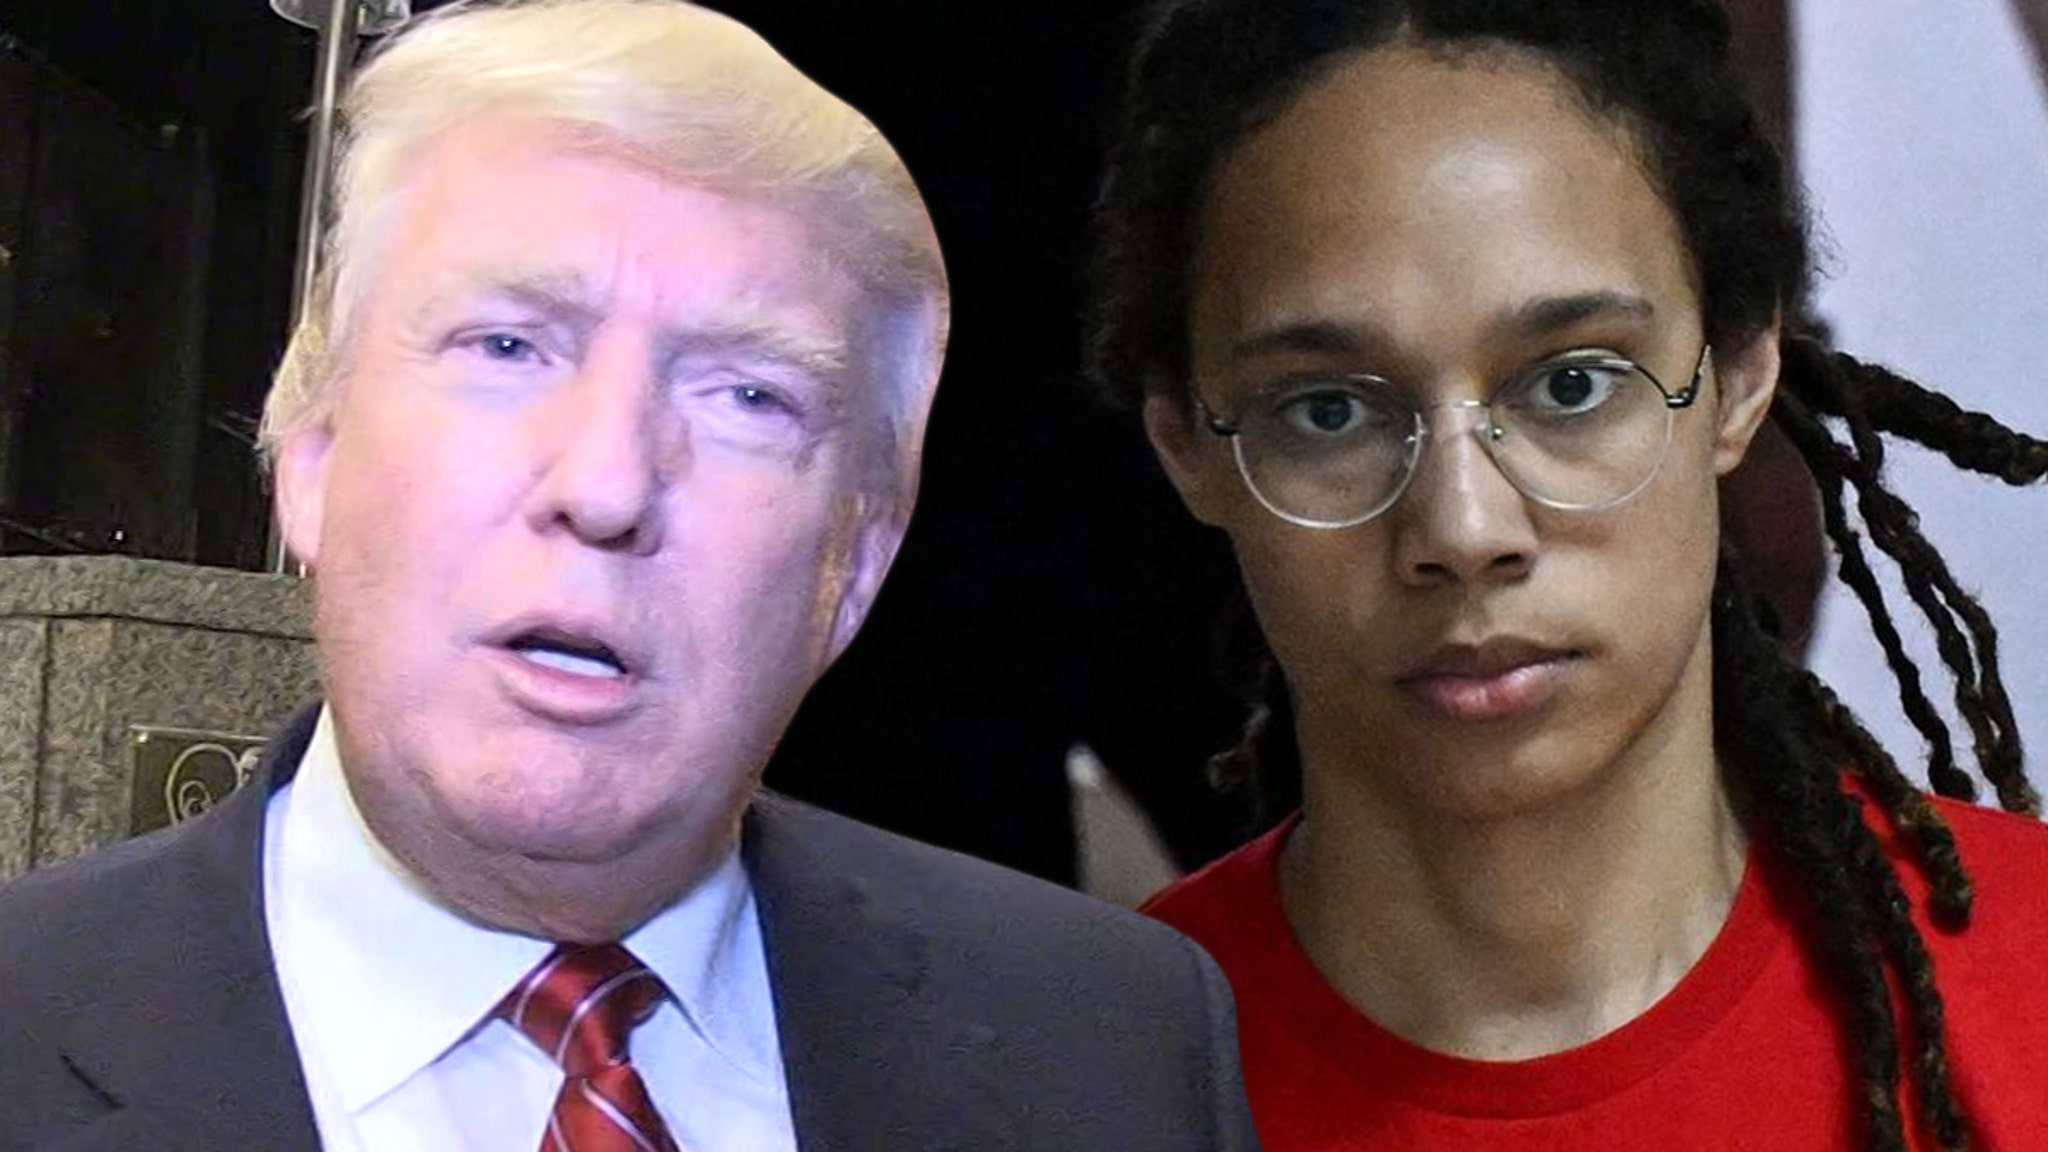 Donald Trump slams Brittney Griner for going to Russia 'laden with drugs'